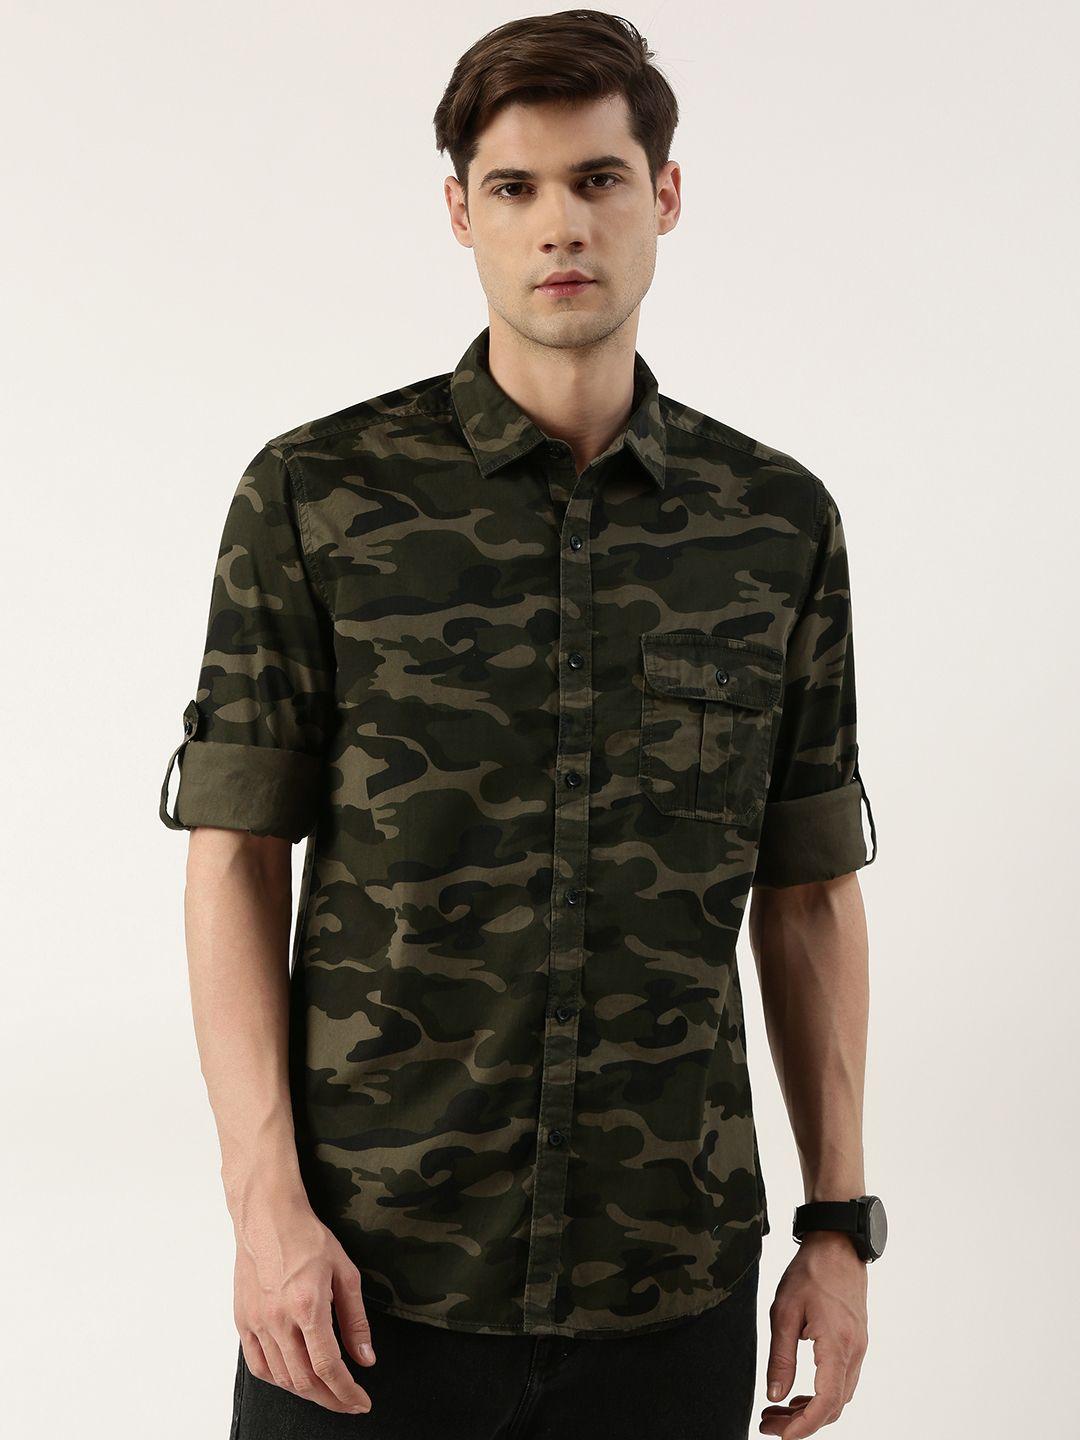 ivoc-men-standard-camouflage-printed-pure-cotton-casual-shirt